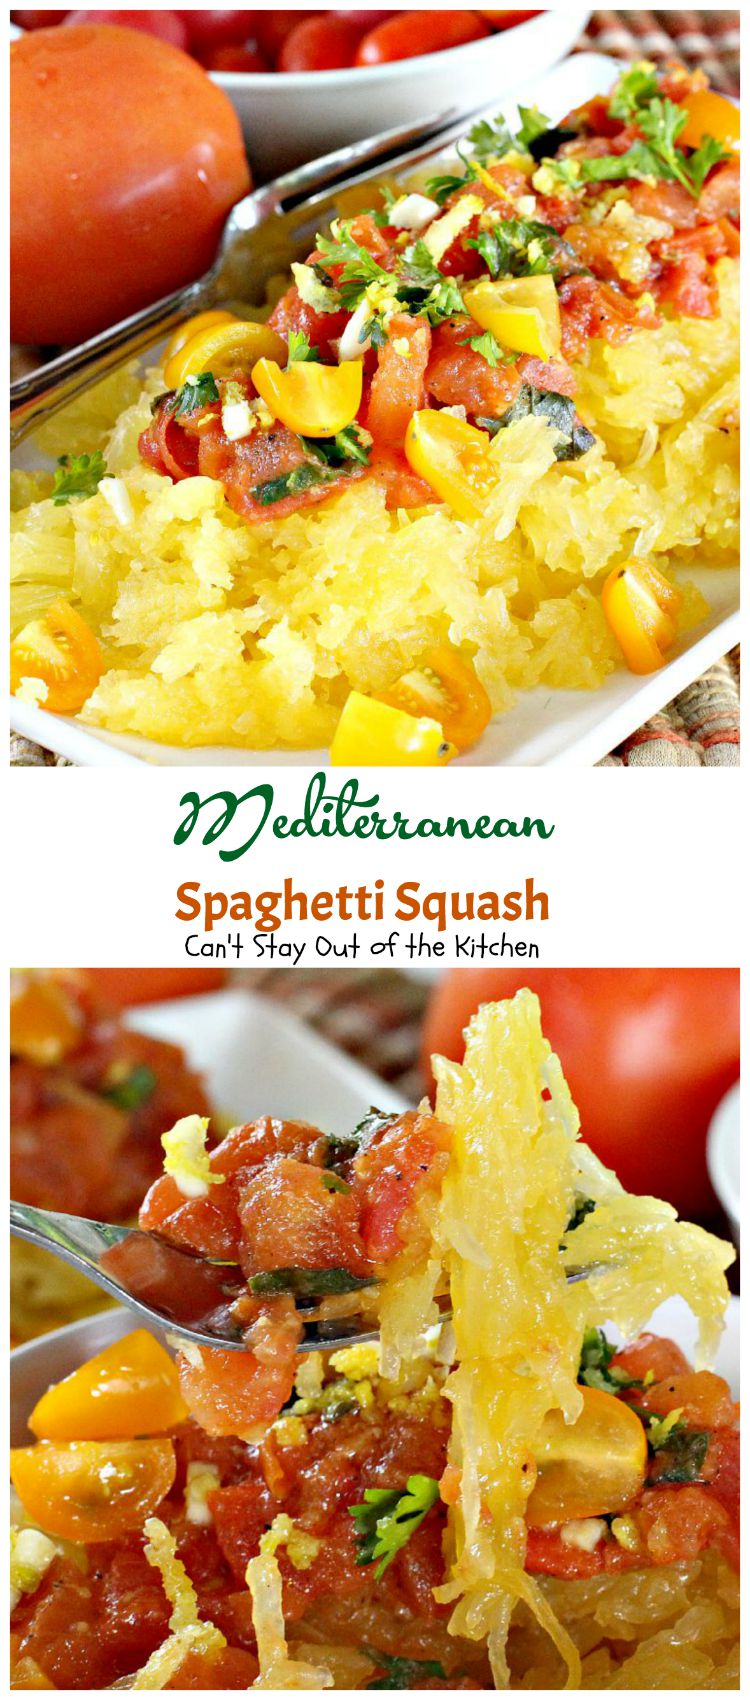 Mediterranean Spaghetti Squash – Can't Stay Out of the Kitchen